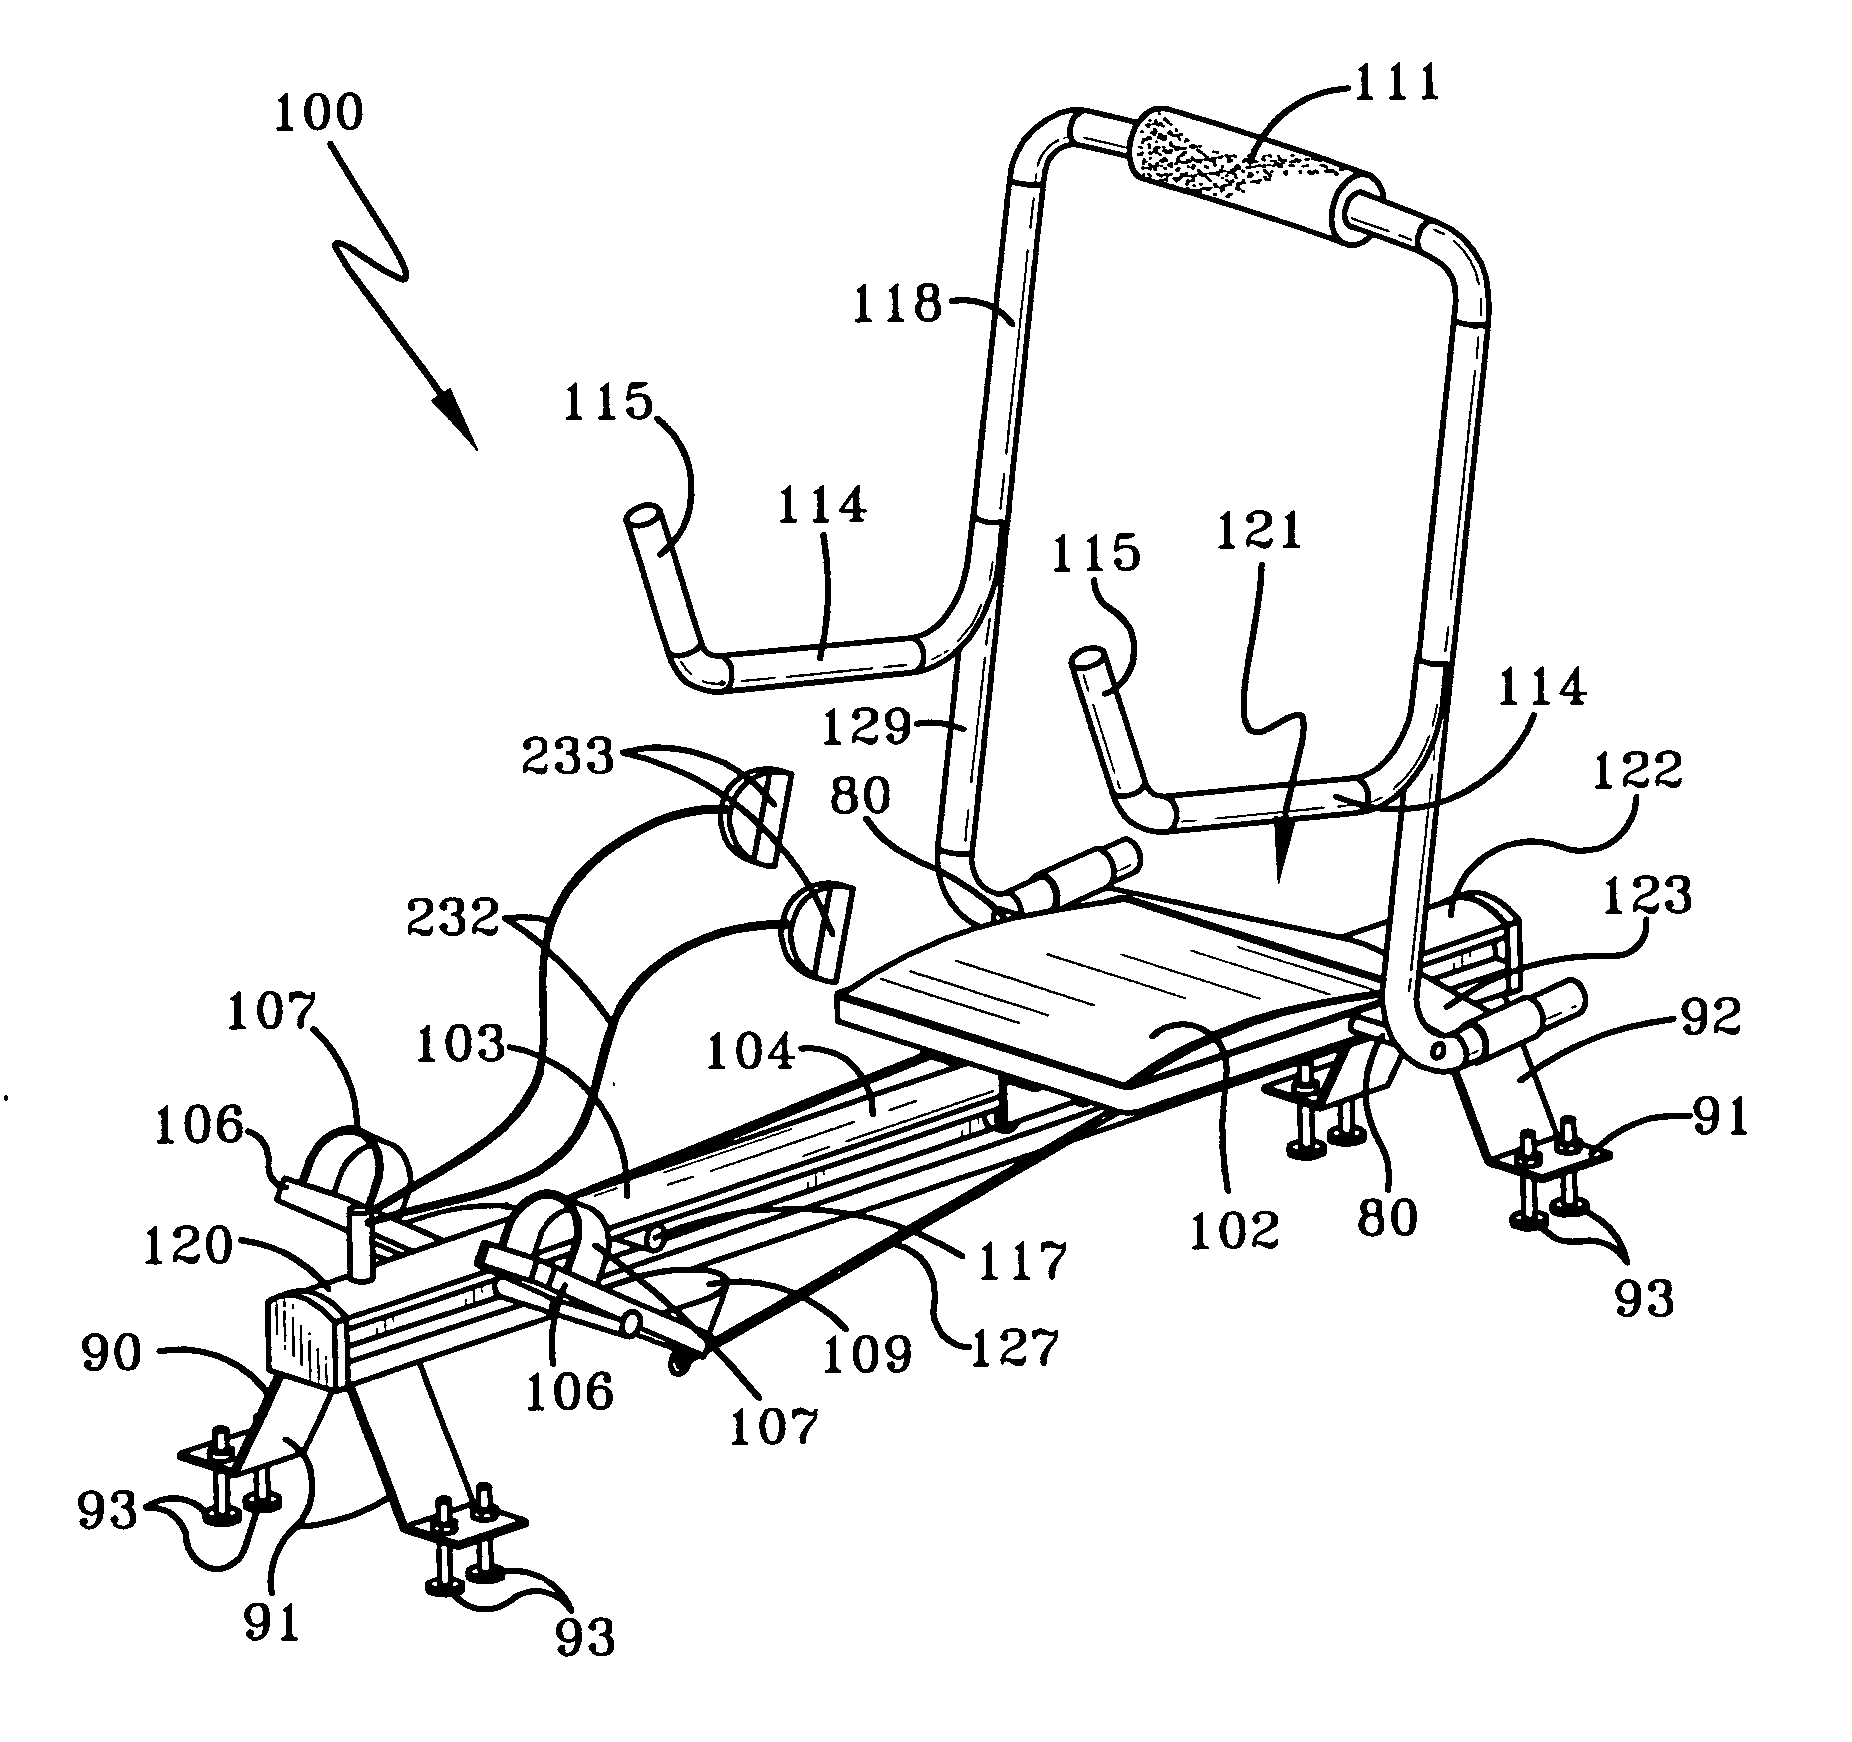 Method and apparatus for targeting abdominal muscles while receiving a cardiovascular workout